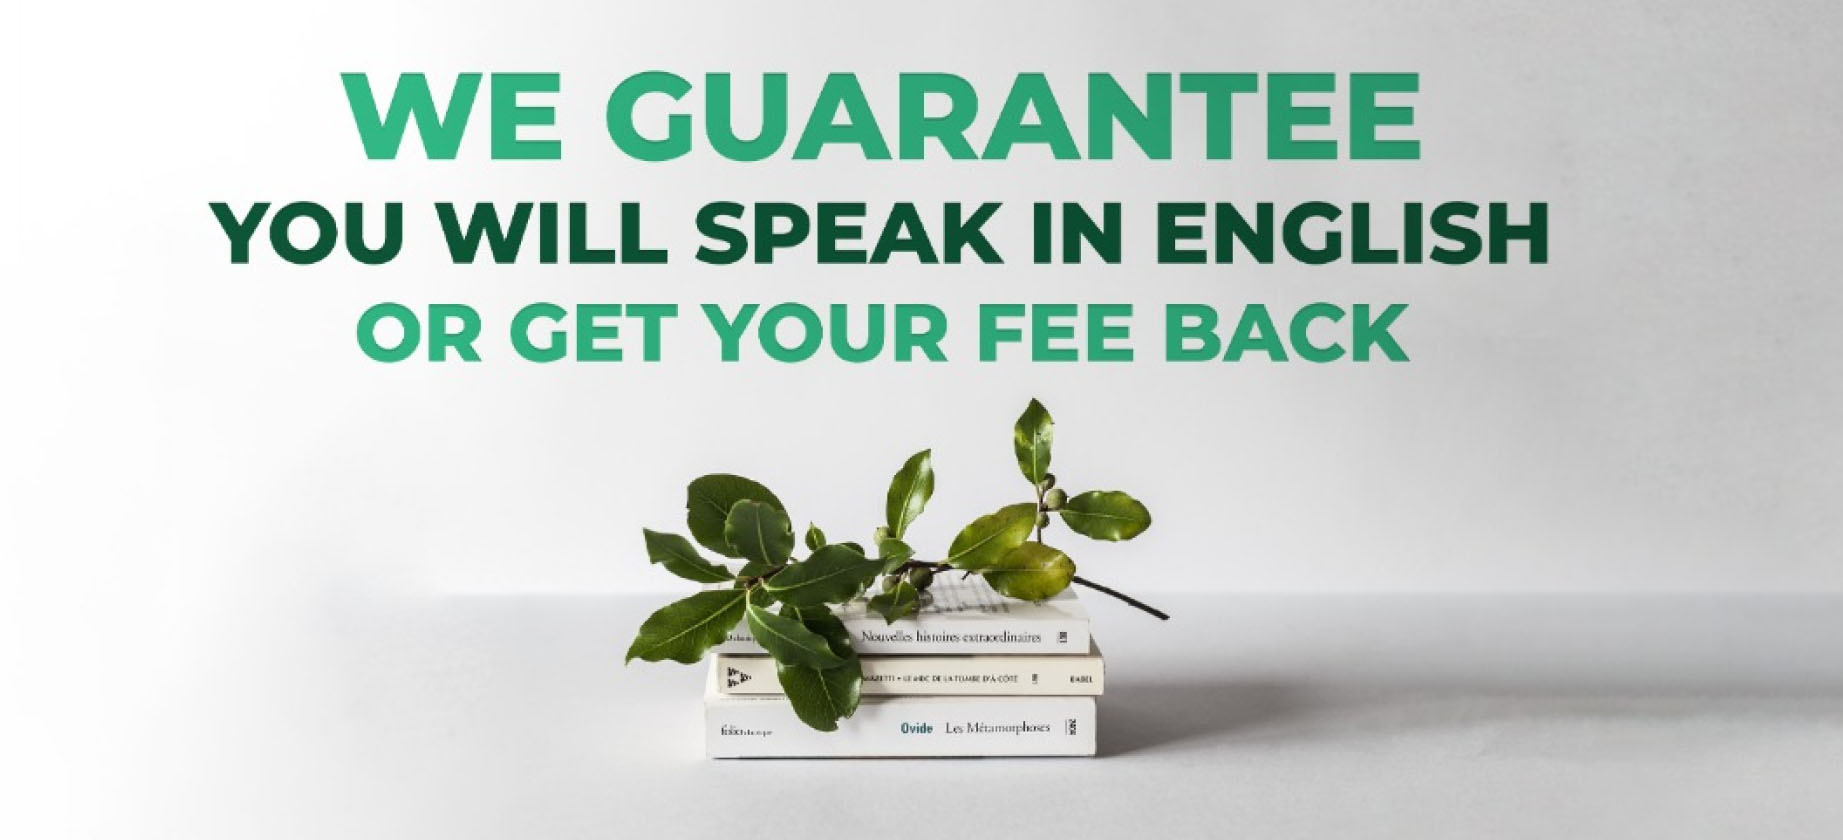 GILP provides guarantee to speak in english or get your fee back with our spoken english course .